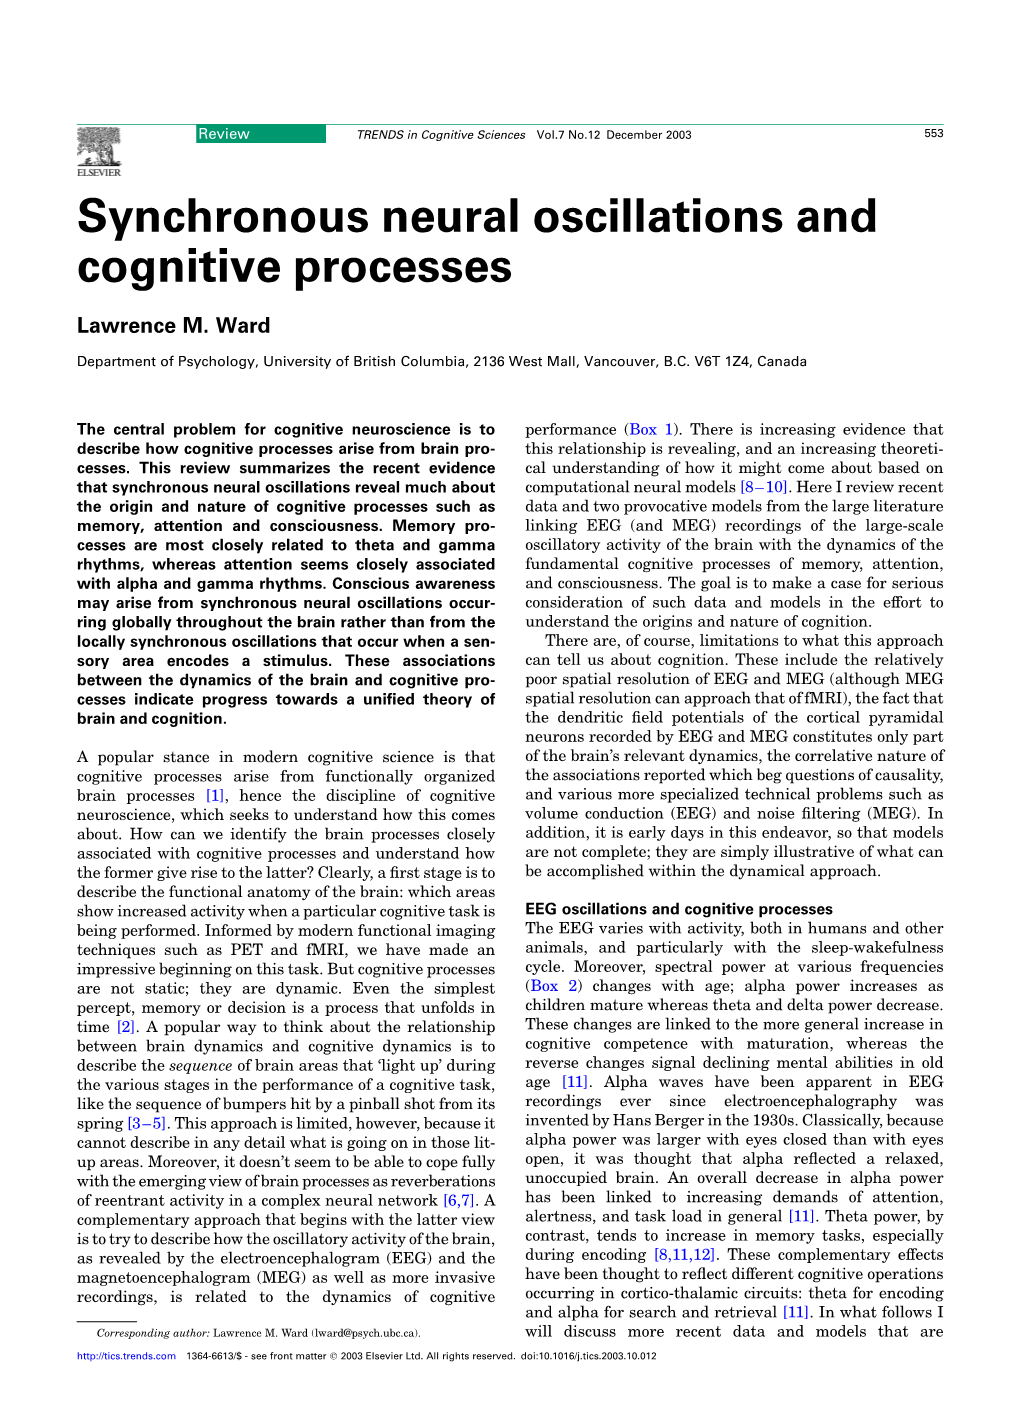 Synchronous Neural Oscillations and Cognitive Processes